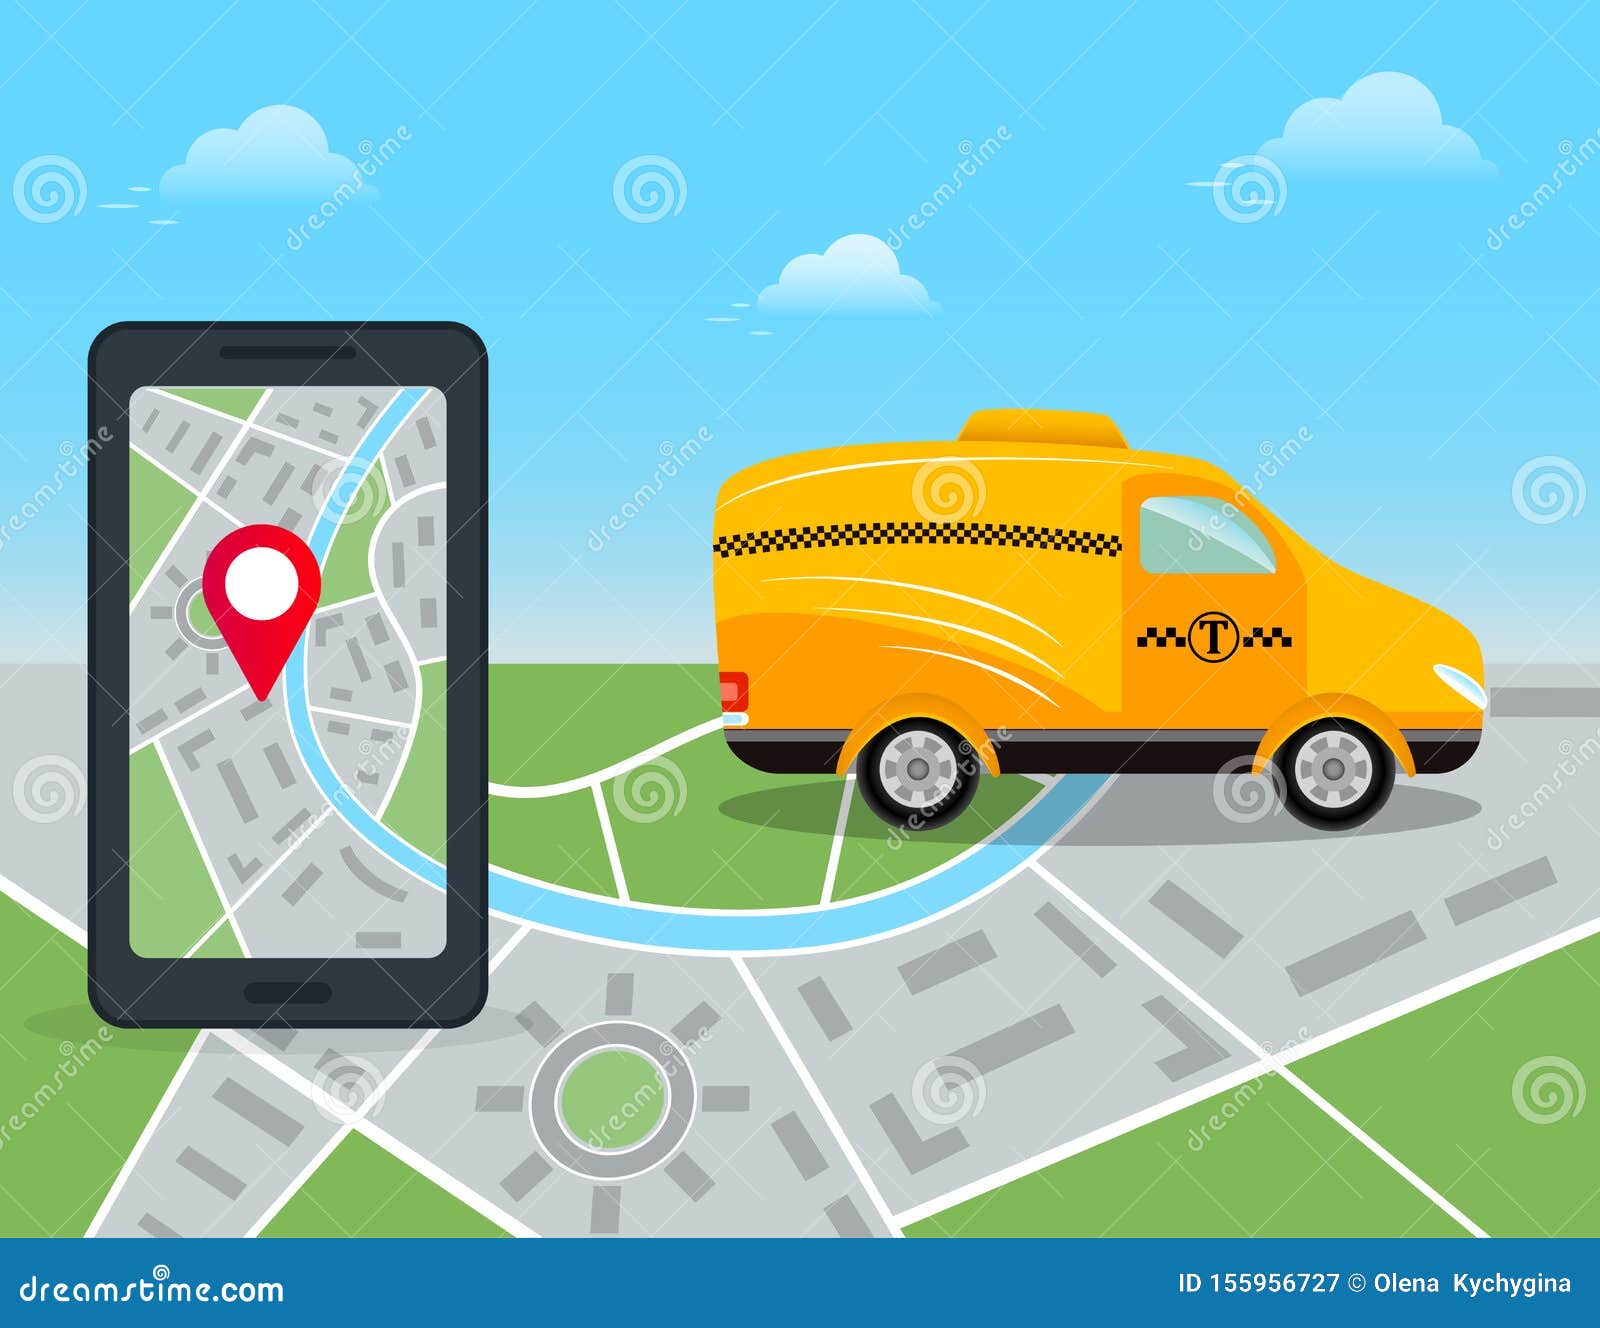 Taxi Service. Smartphone with Mobile App for Tracking Taxi and Yellow Car  on Background with City Map Stock Illustration - Illustration of banner,  business: 155956727